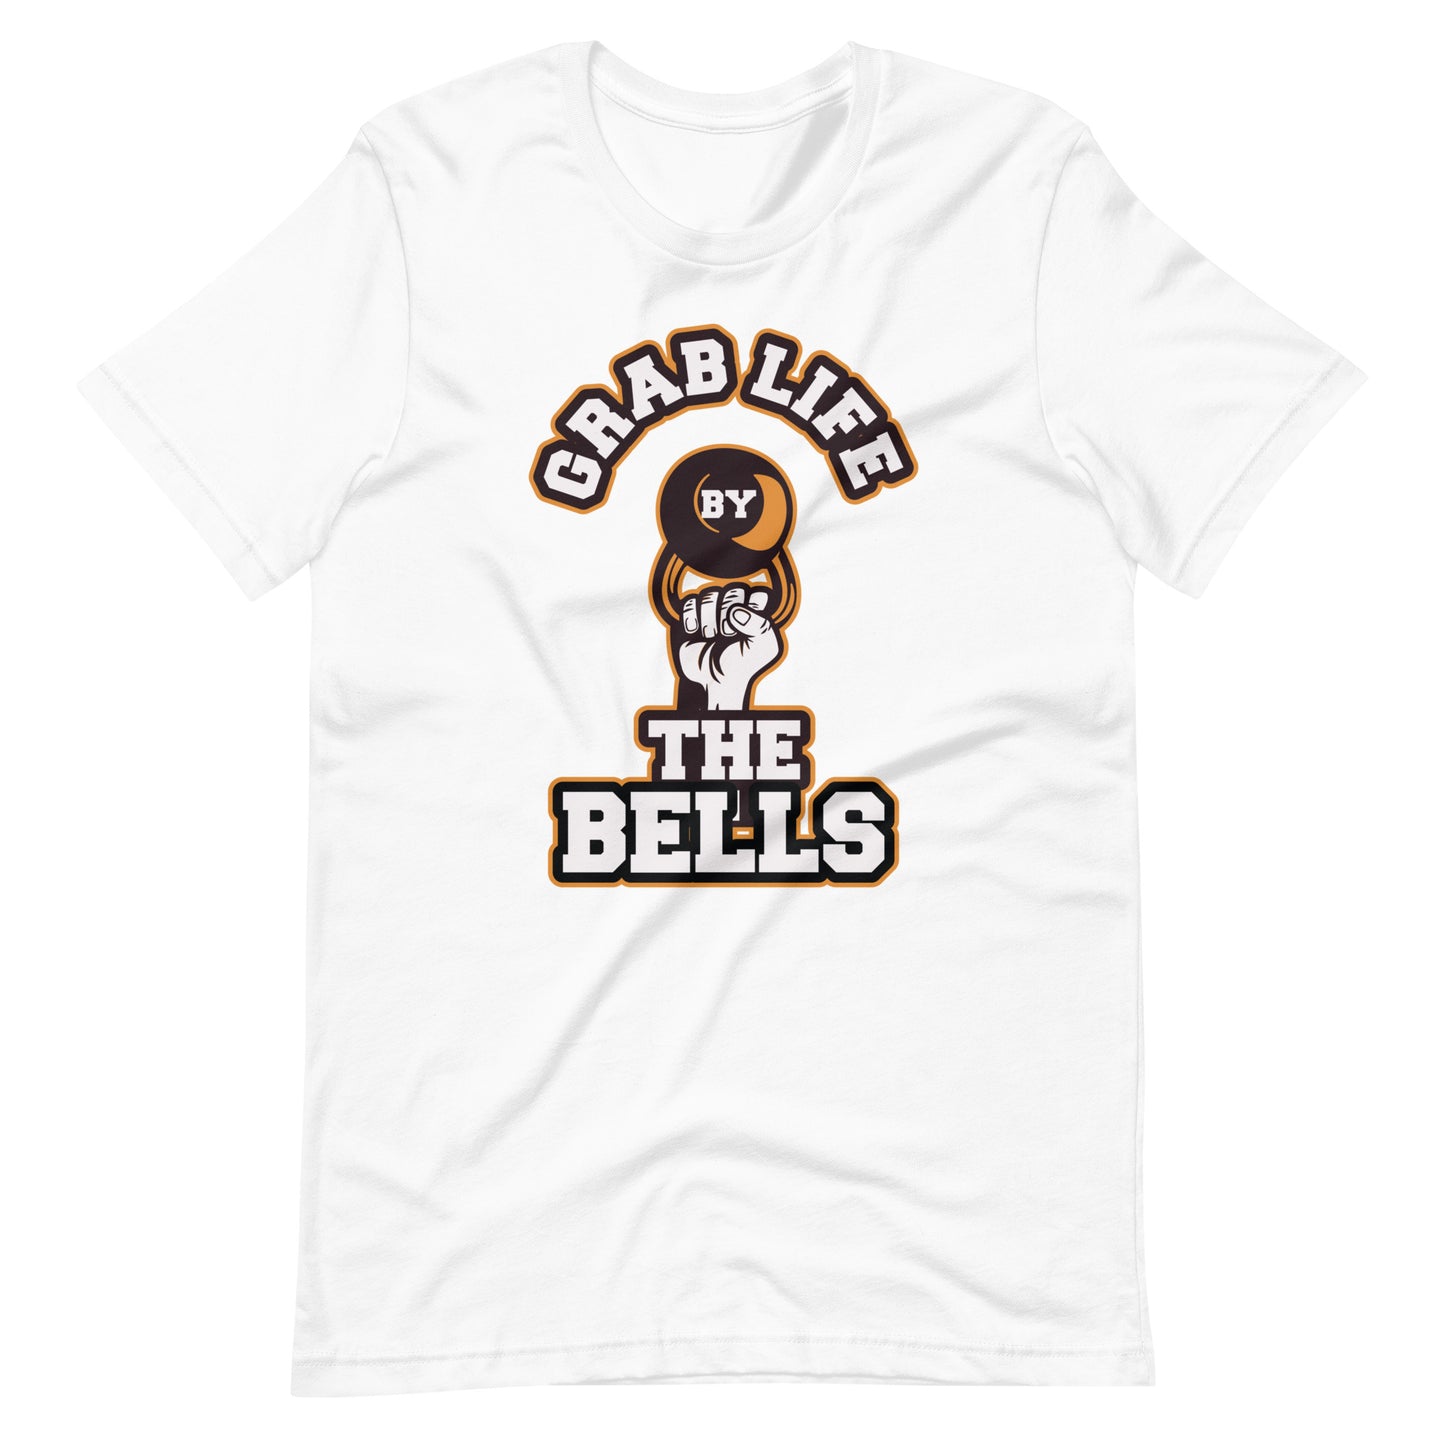 Grab life by the bells unisex t-shirt The Workout Inspiration